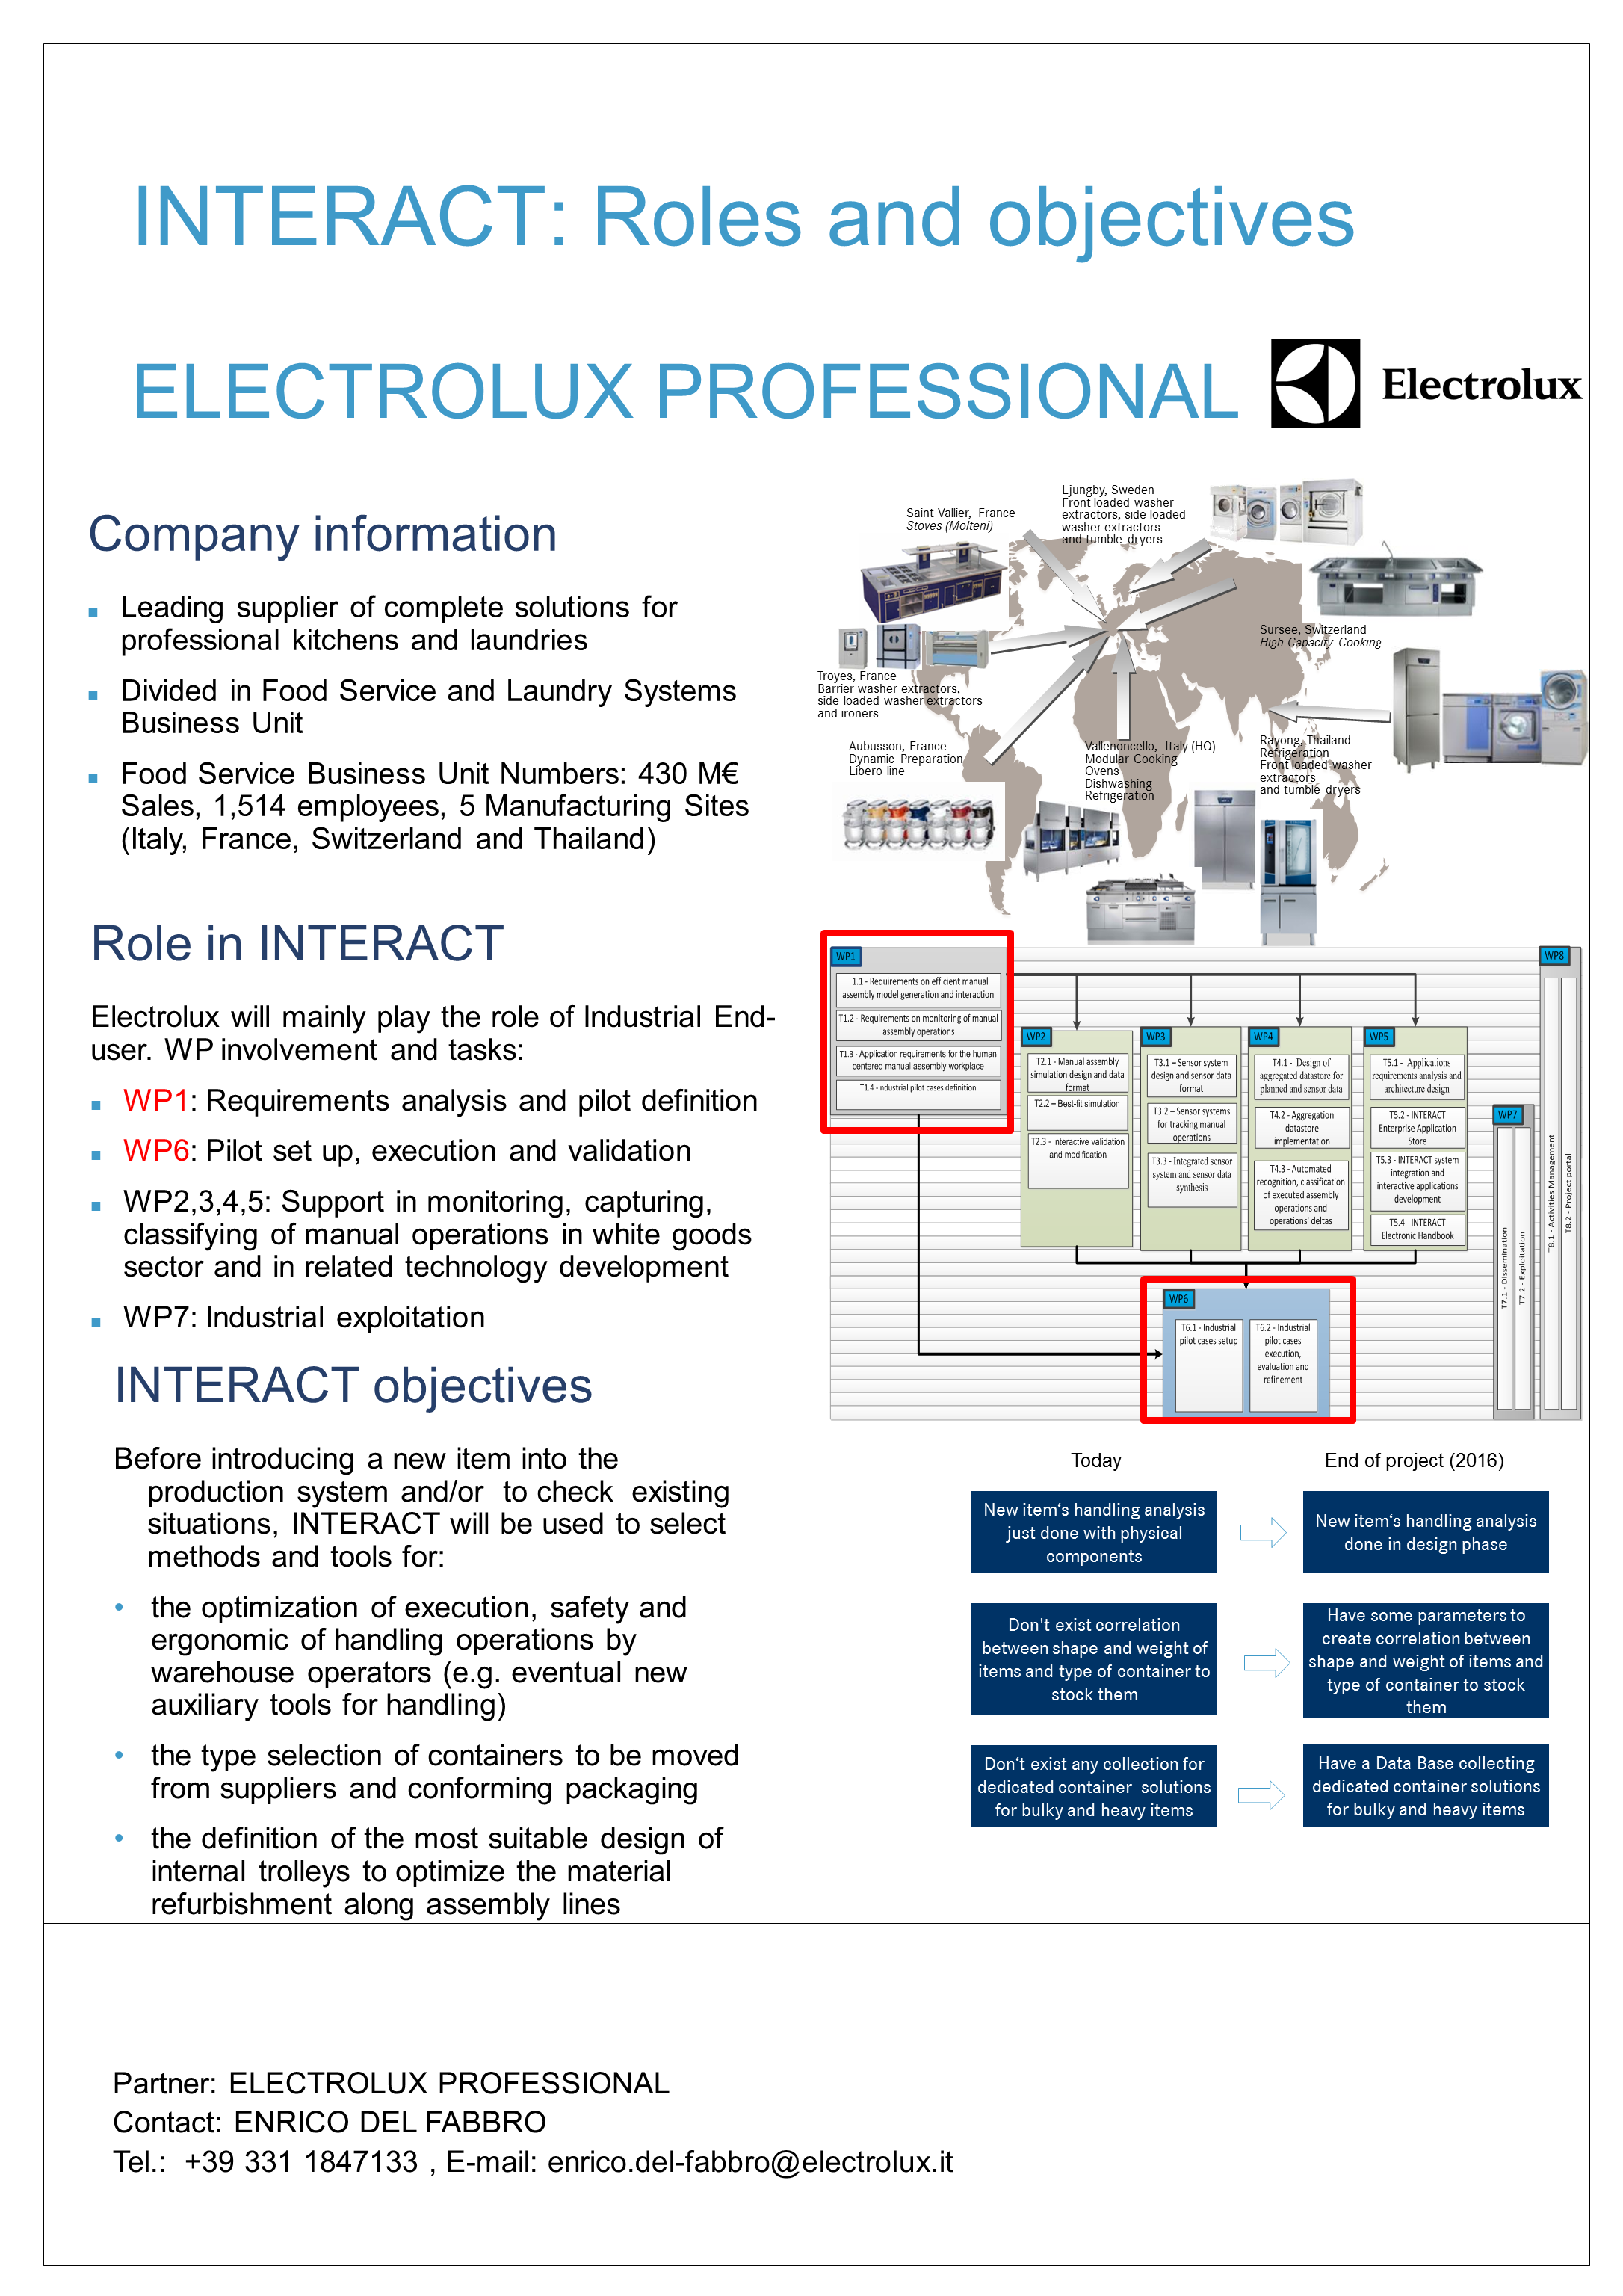 INTERACT Poster Electrolux